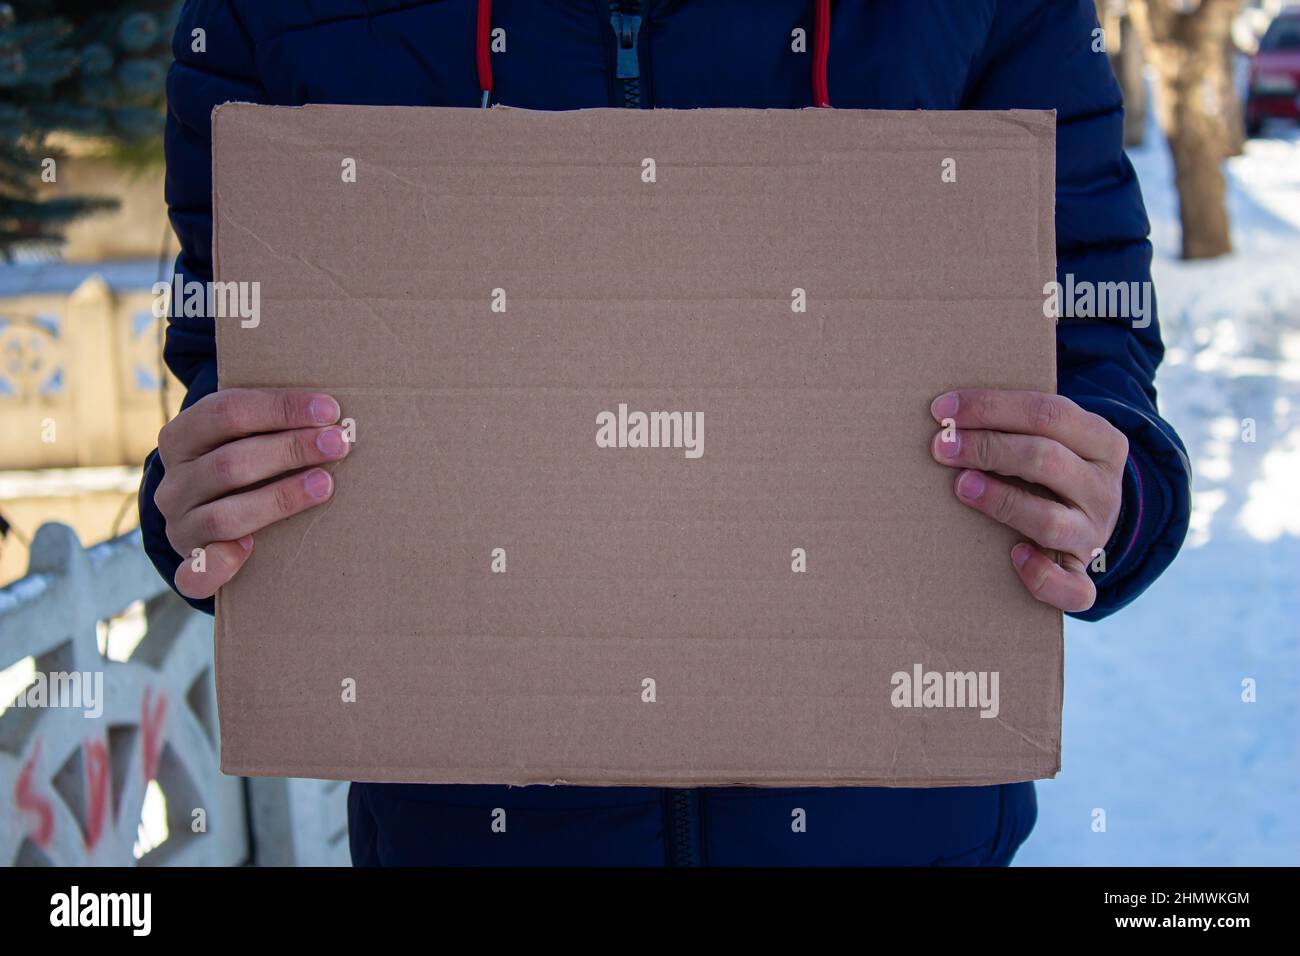 Man holding blank cardboard box, protesting something. Copy space for text on cardboard box. Stock Photo